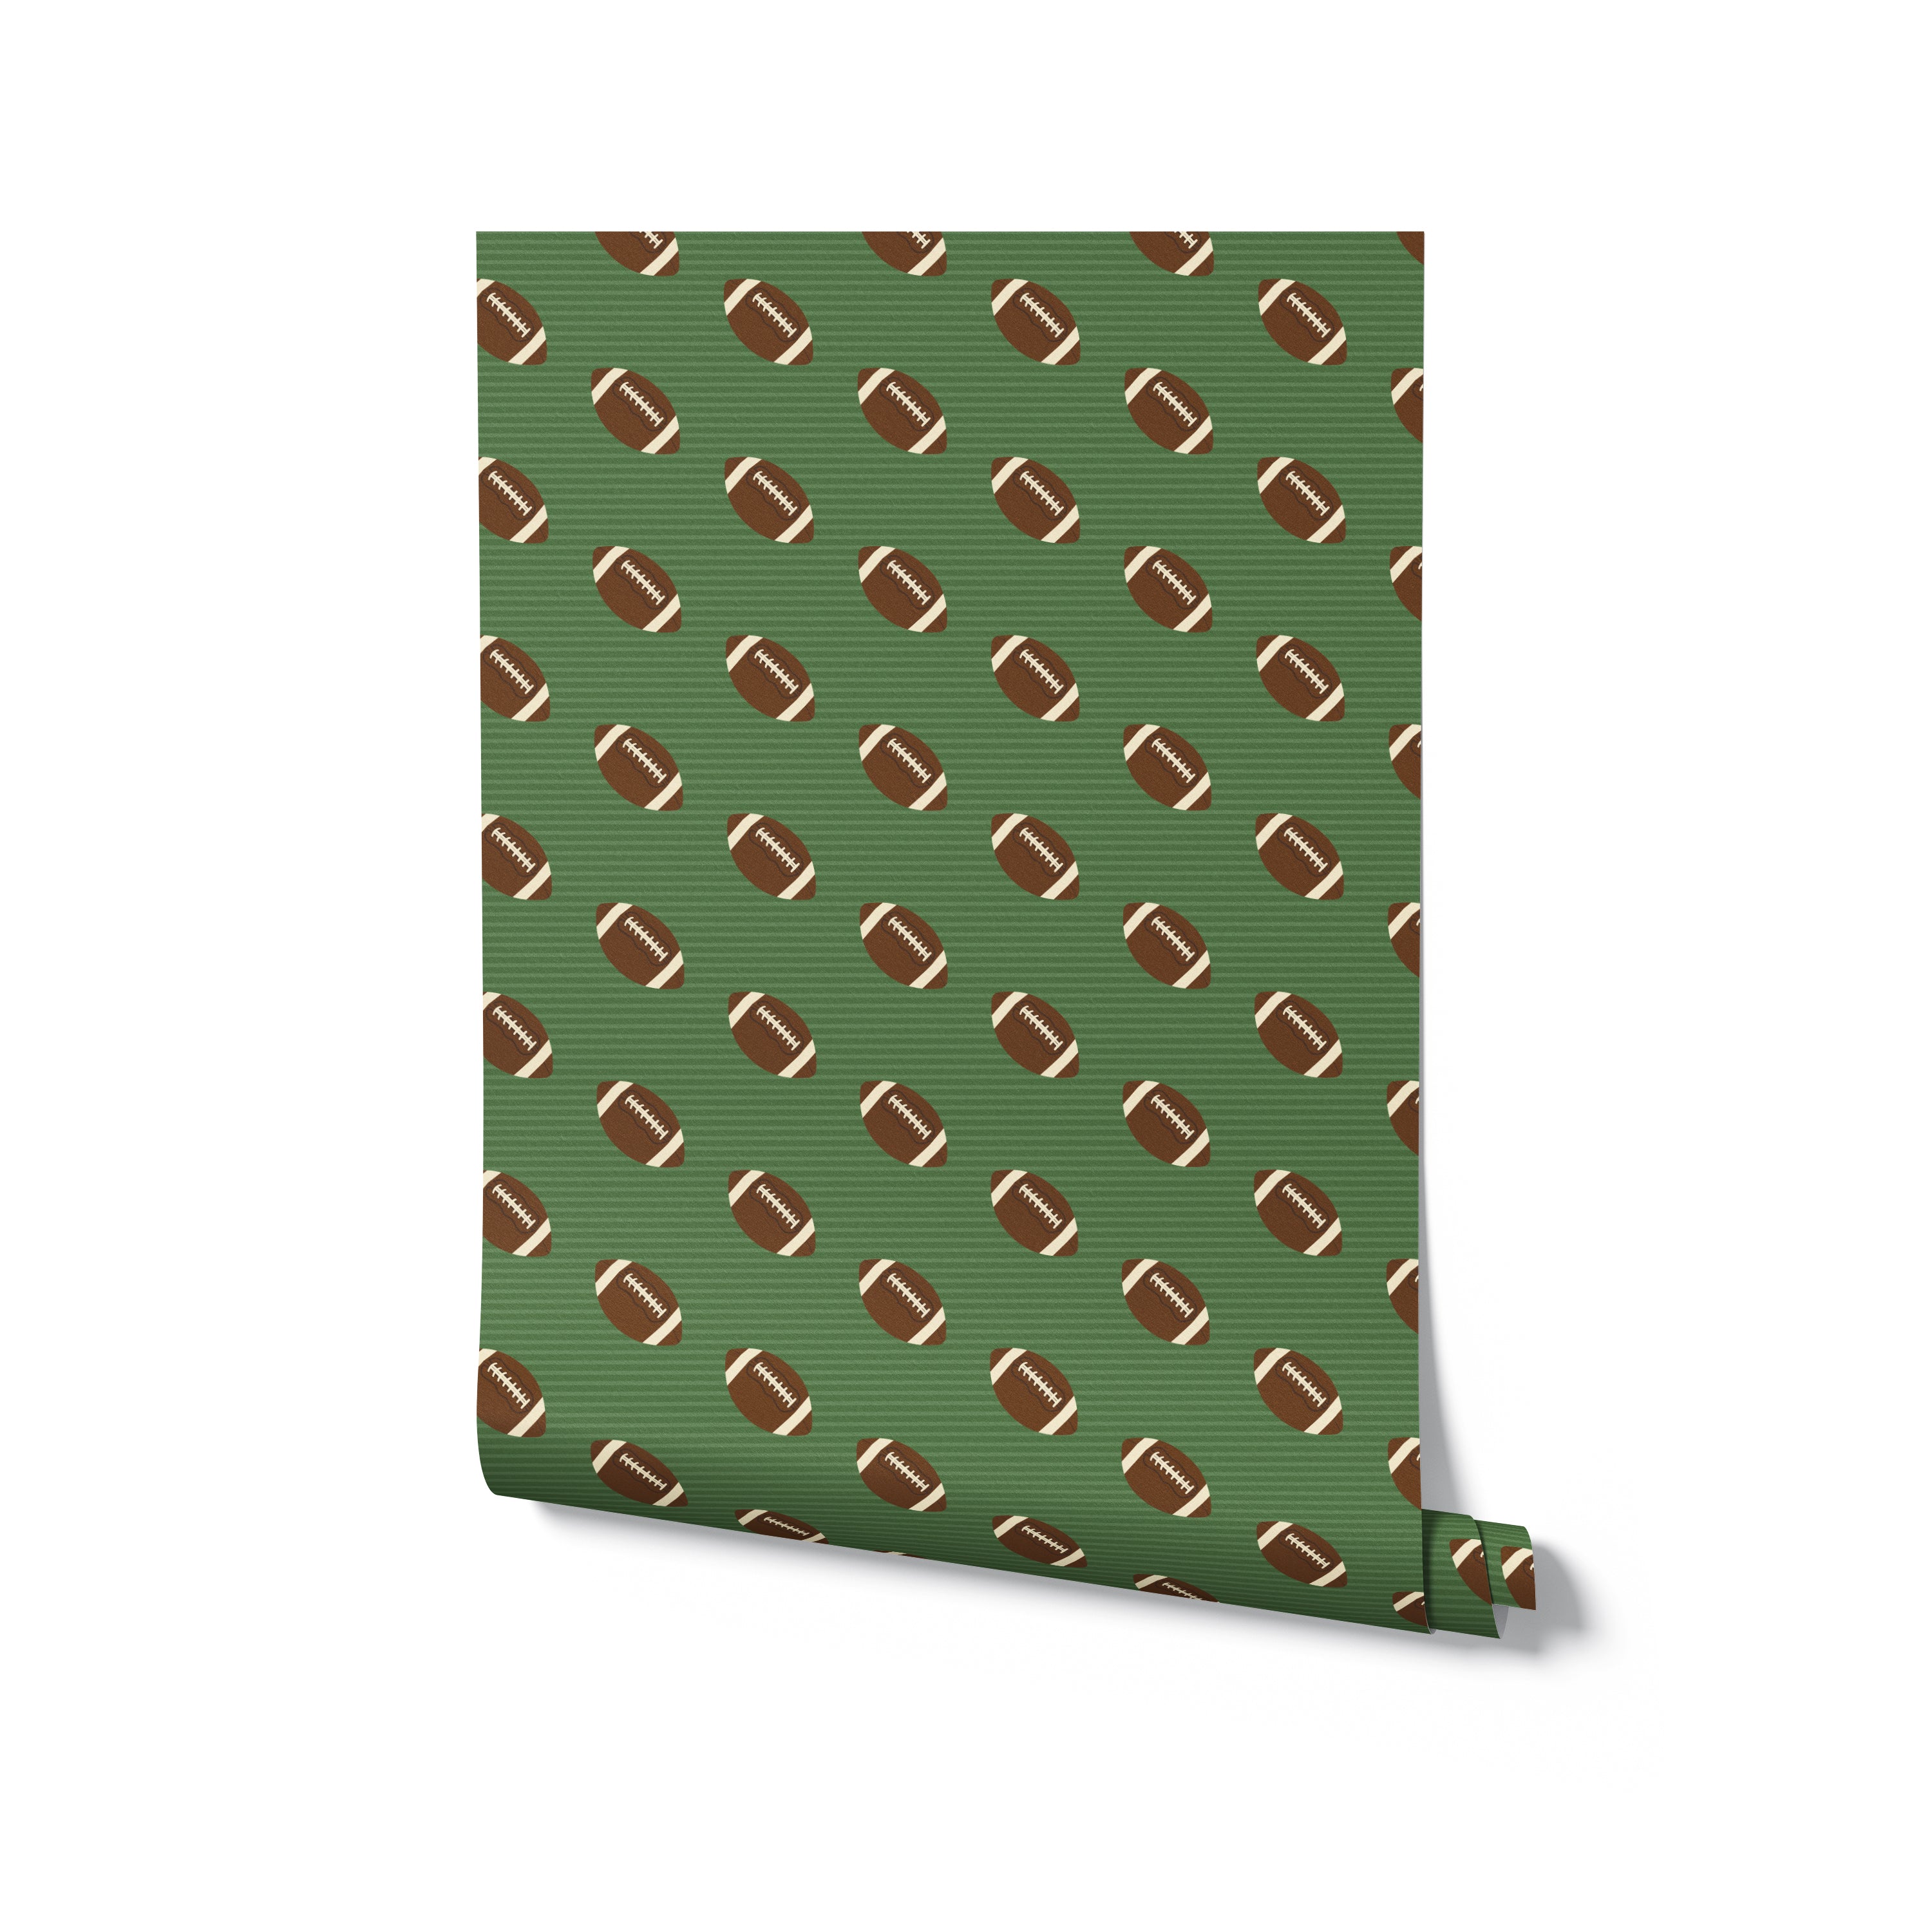 A single roll of Football Frenzy wallpaper unrolled to display its sporty pattern of brown footballs with white stripes on a green striped background.